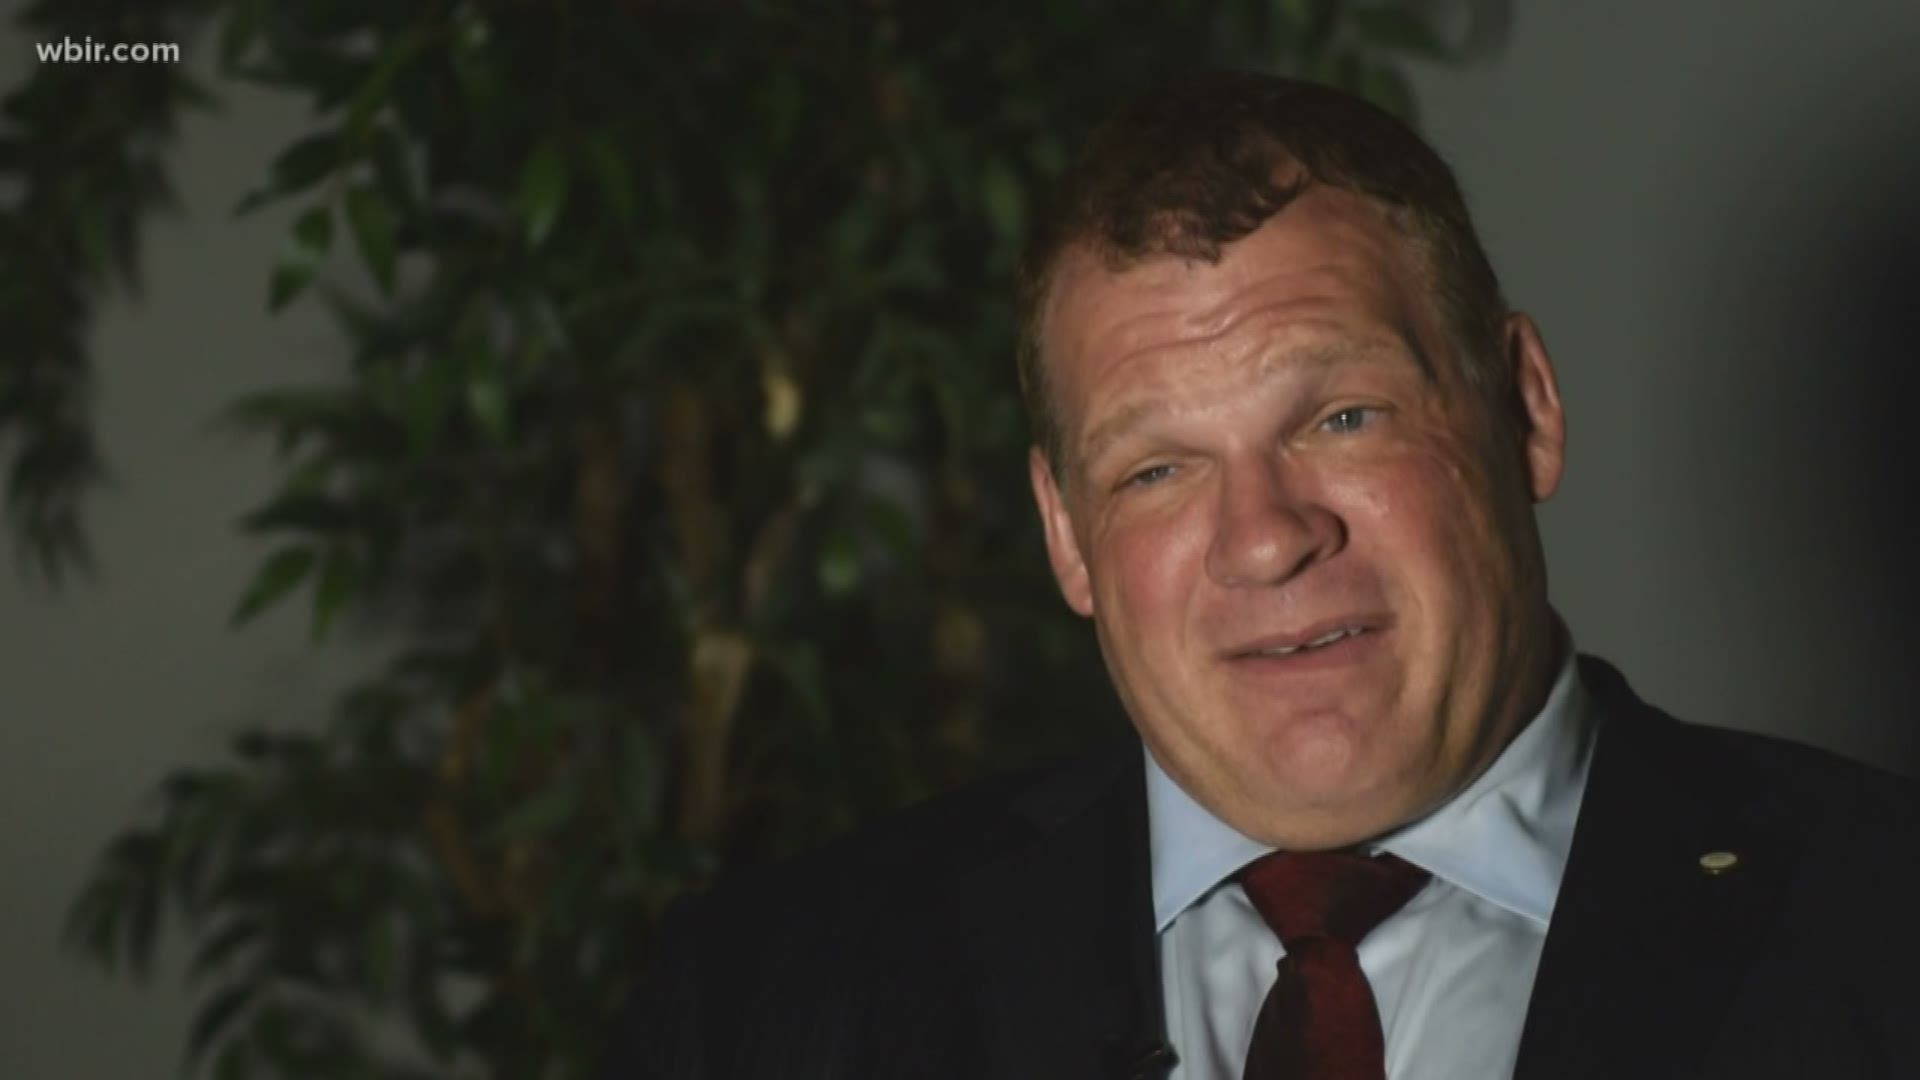 Mayor-elect Glenn Jacobs will officially become the new Mayor of Knox County on Sept. 1.